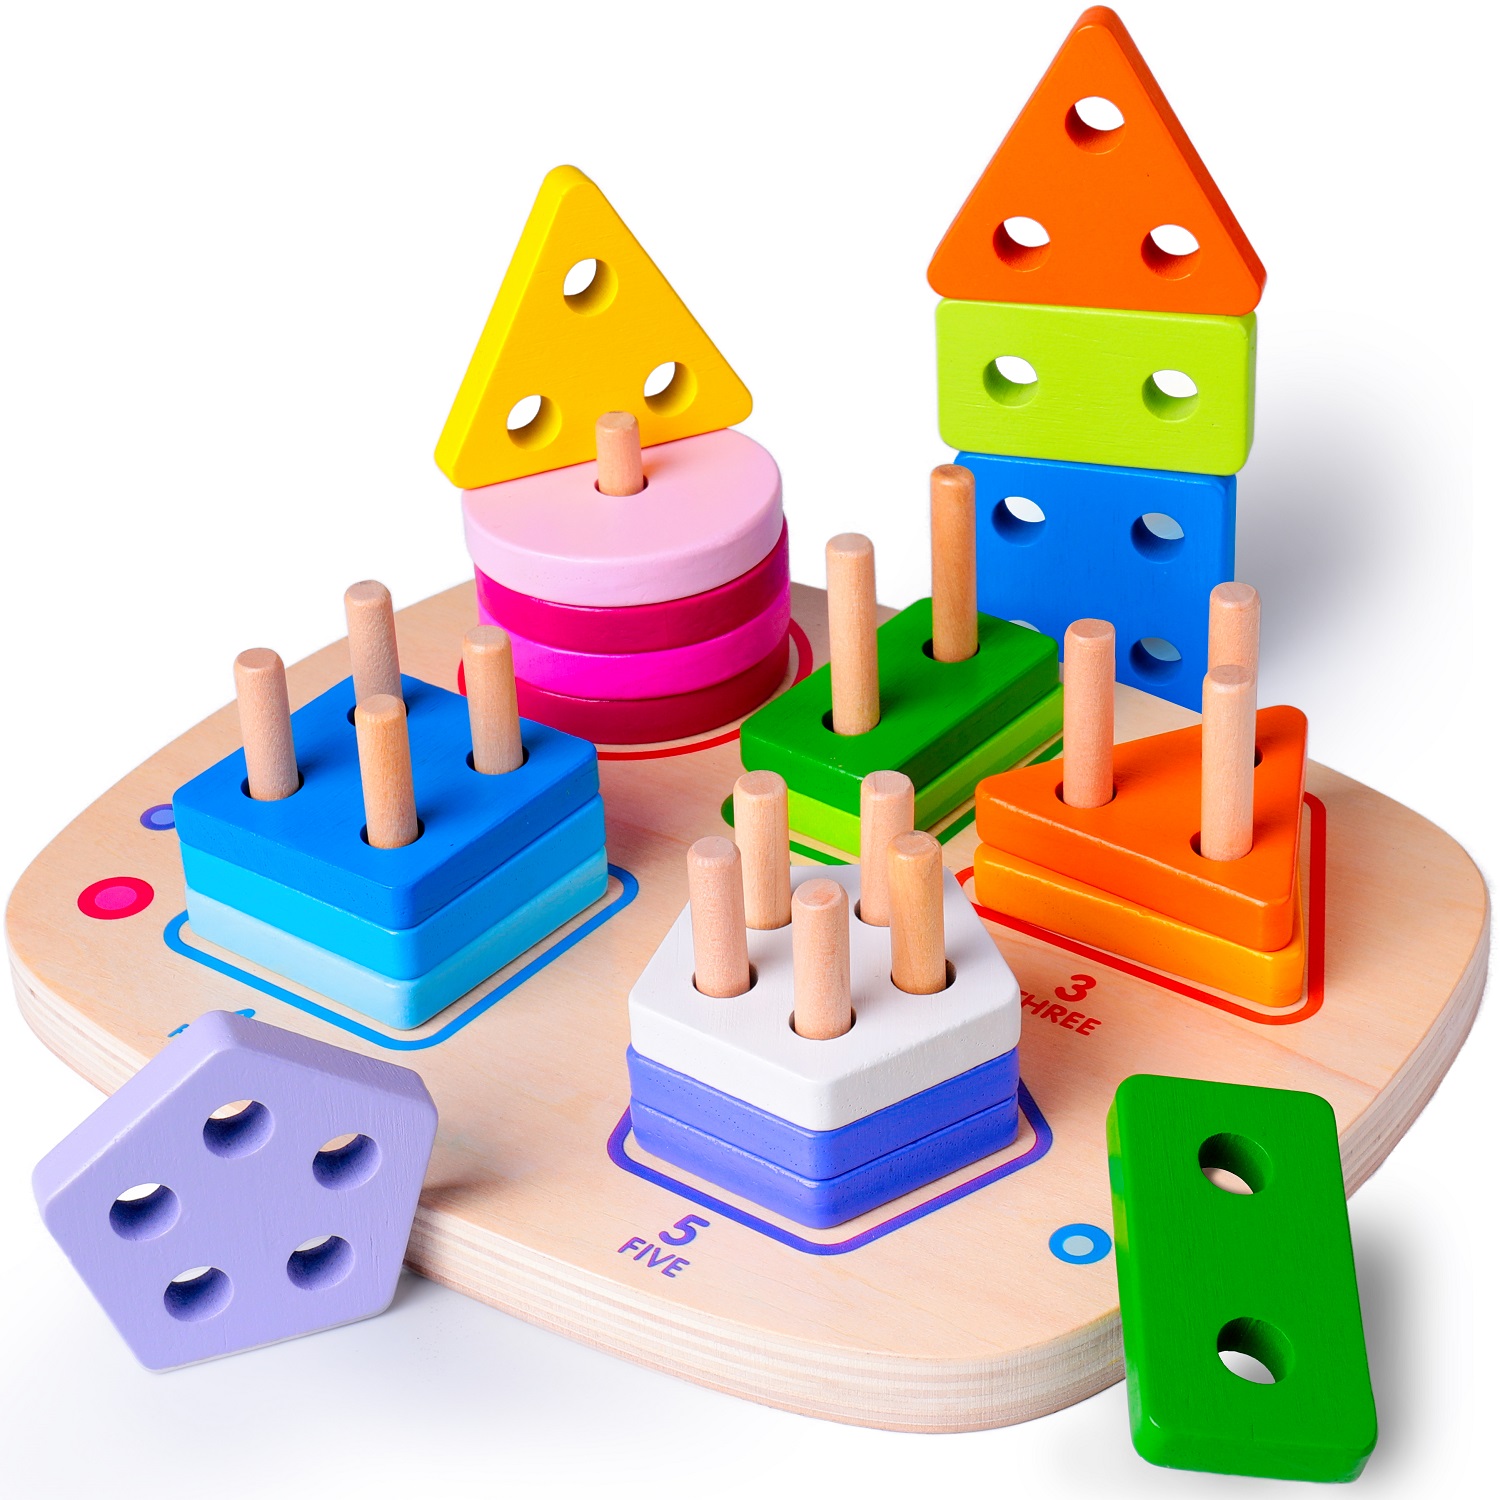 Wooden Geometric Shape Sorter Sorting Puzzle Educational Baby Toddler Toy Gifts 